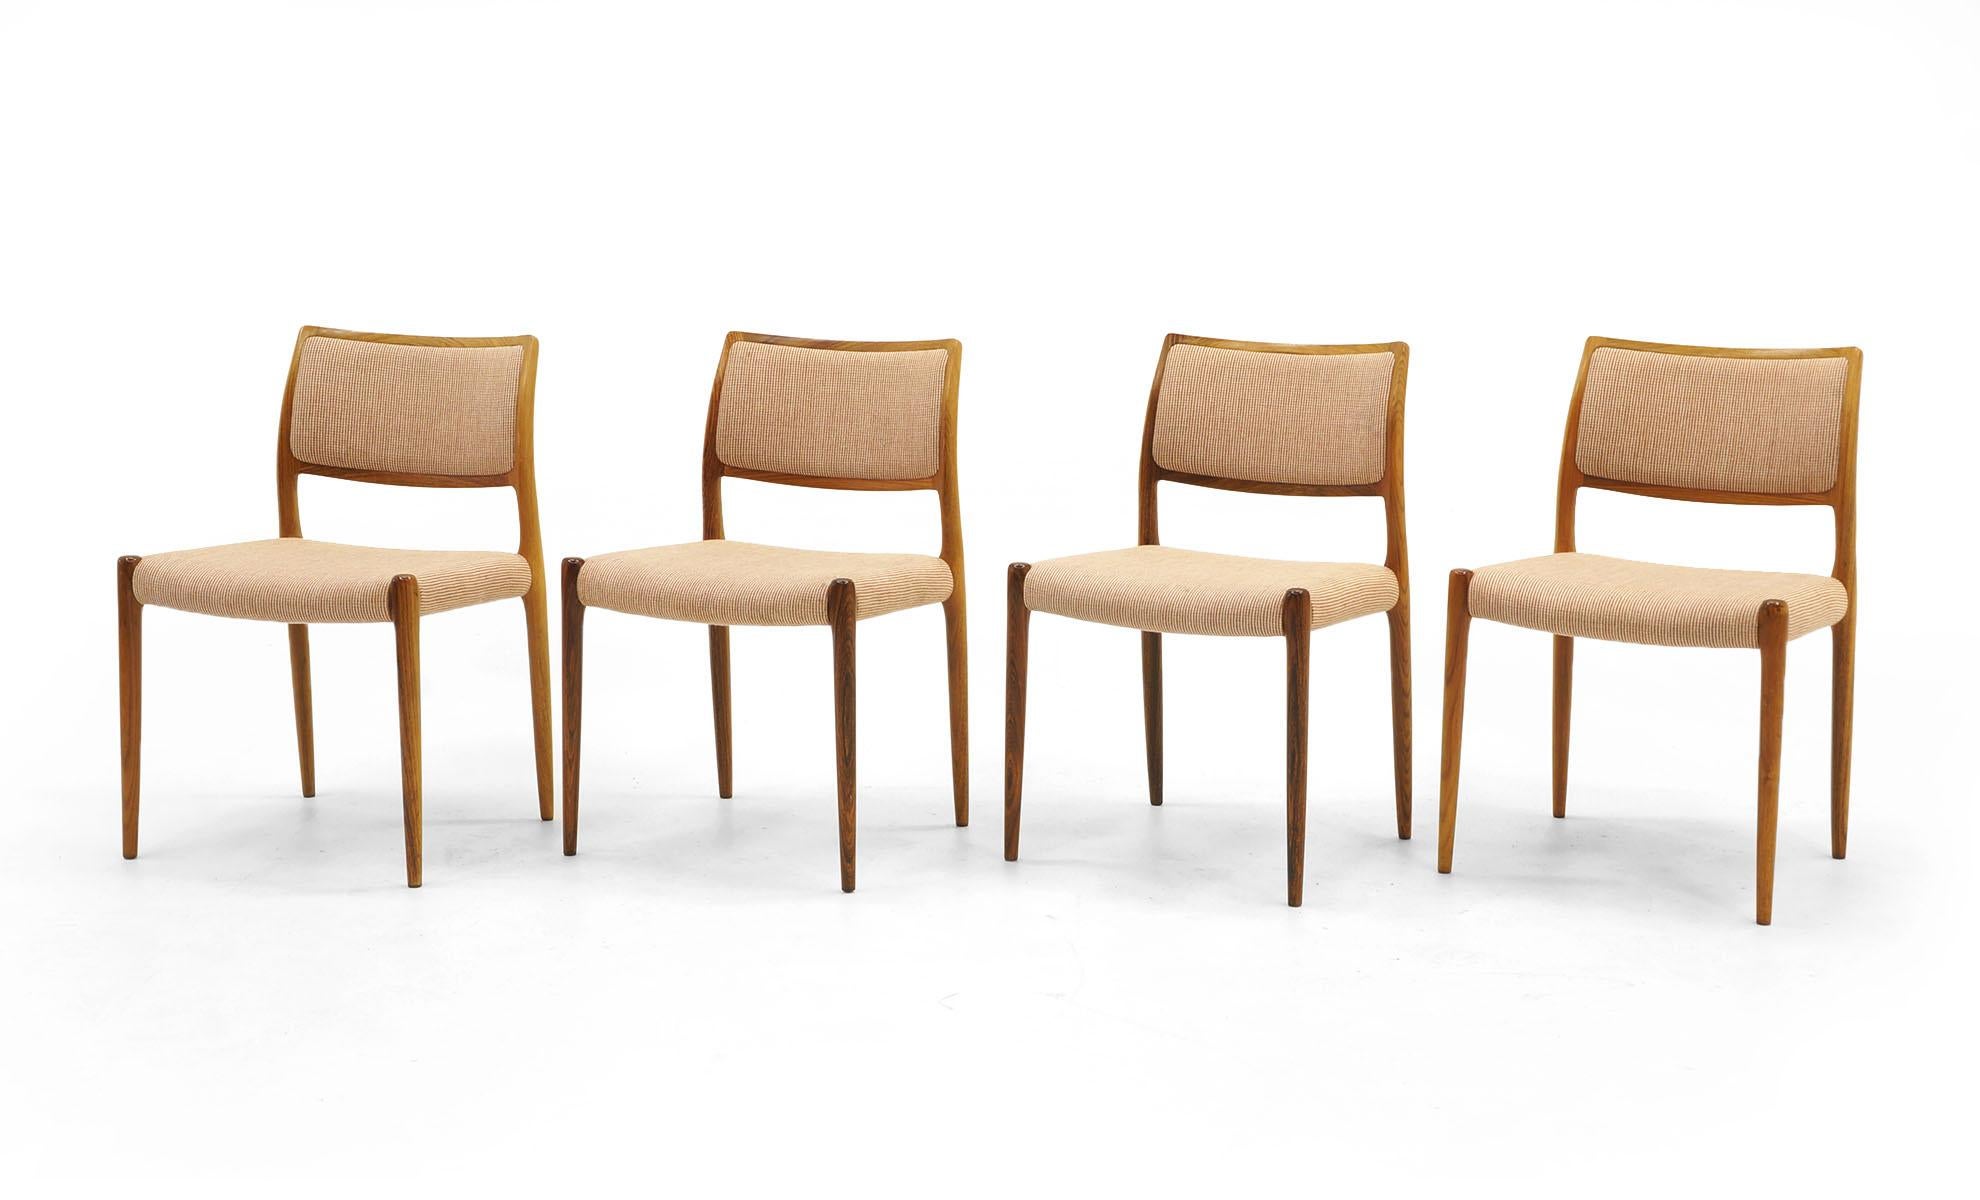 Set of six Danish modern Moller dining chairs in Brazilian rosewood. Two armchairs and four side chairs in excellent condition.

Side chair dimensions:
Measures: 30.5 in. H x 19 in. W x 10.5 in. D
Seat height 17.75 in.
Armchair dimensions